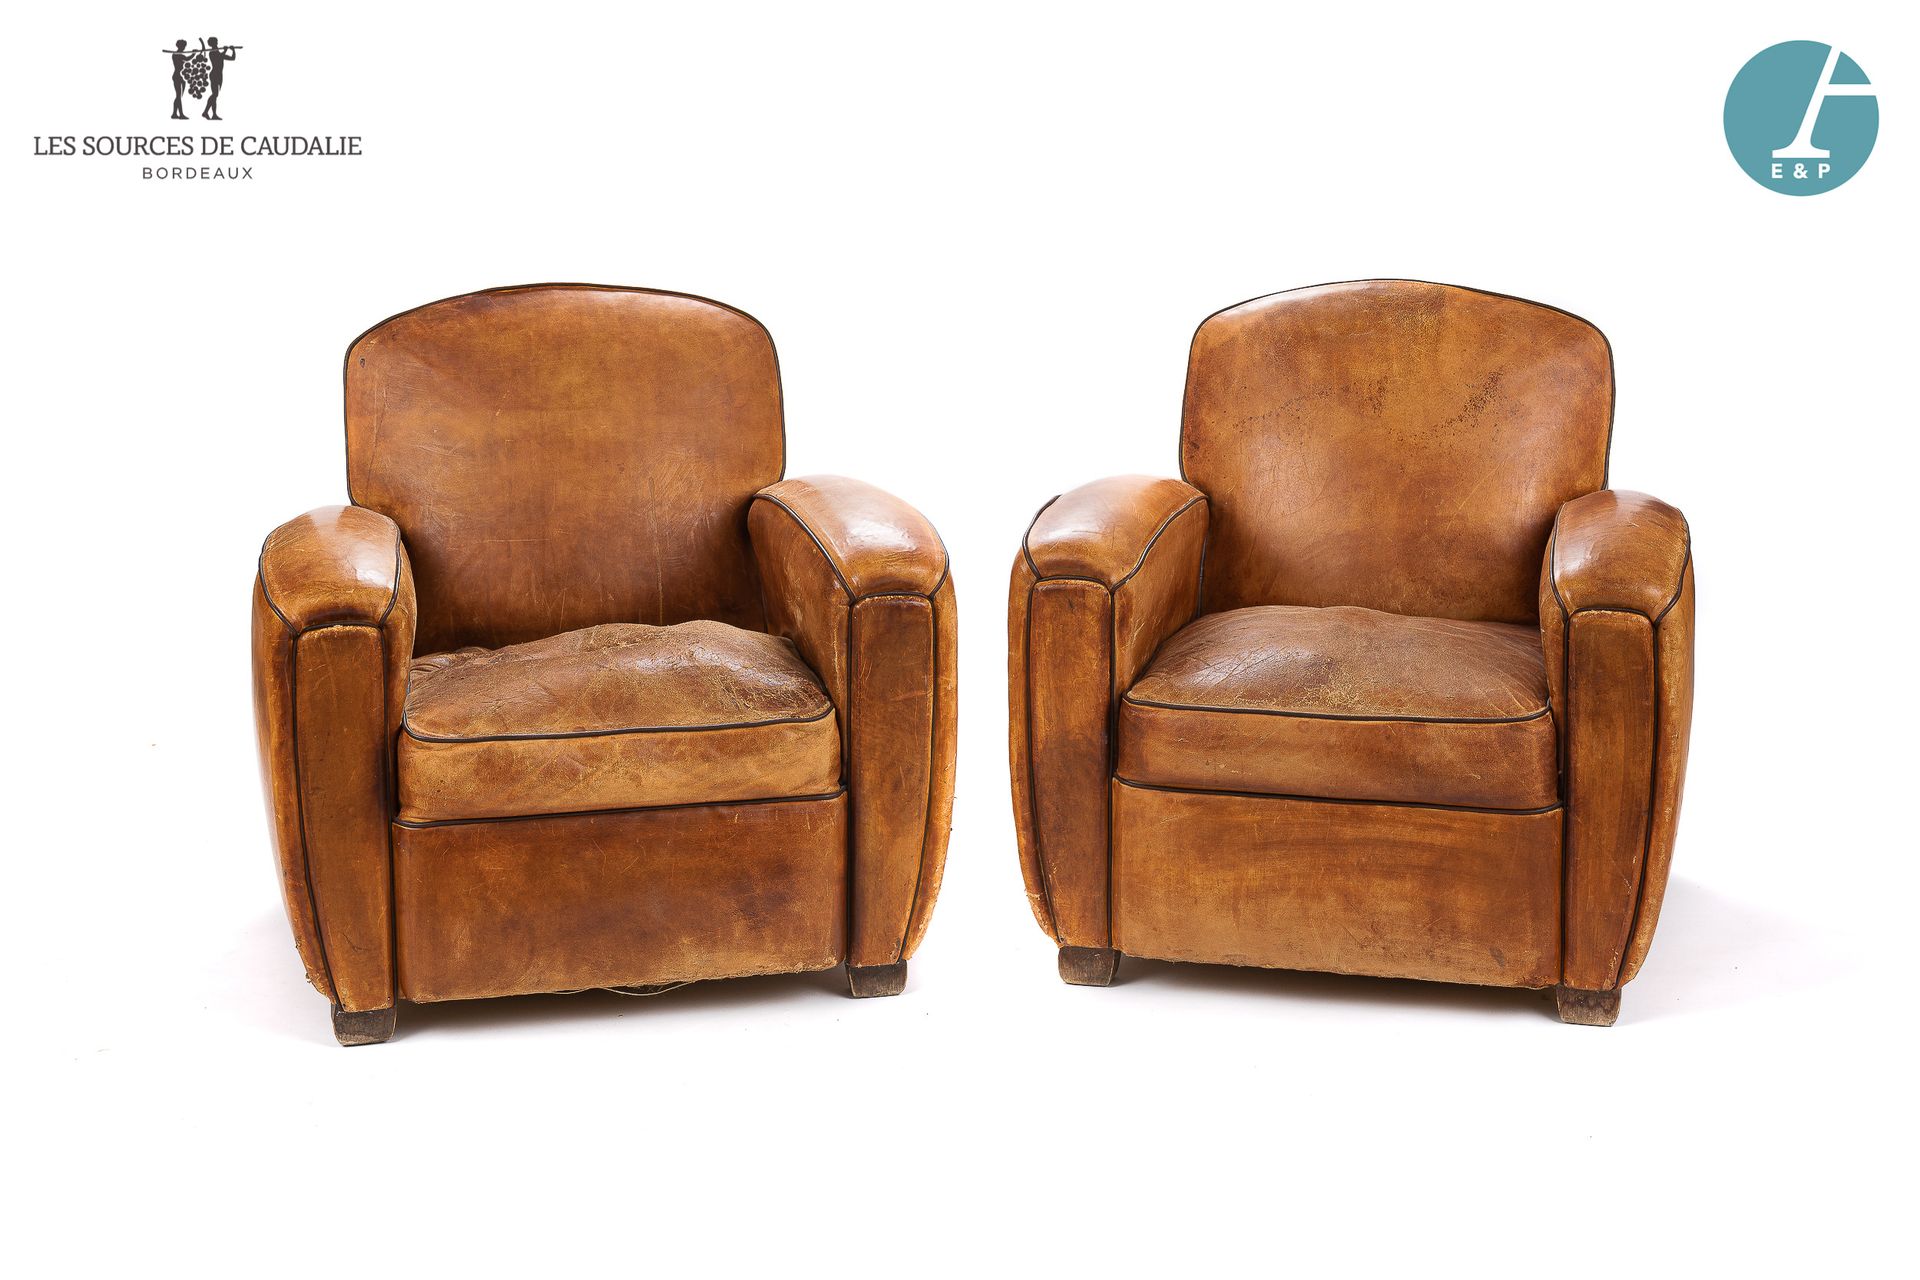 Null From the corridor

Pair of brown leather club chairs

H : 74cm - W : 61cm -&hellip;